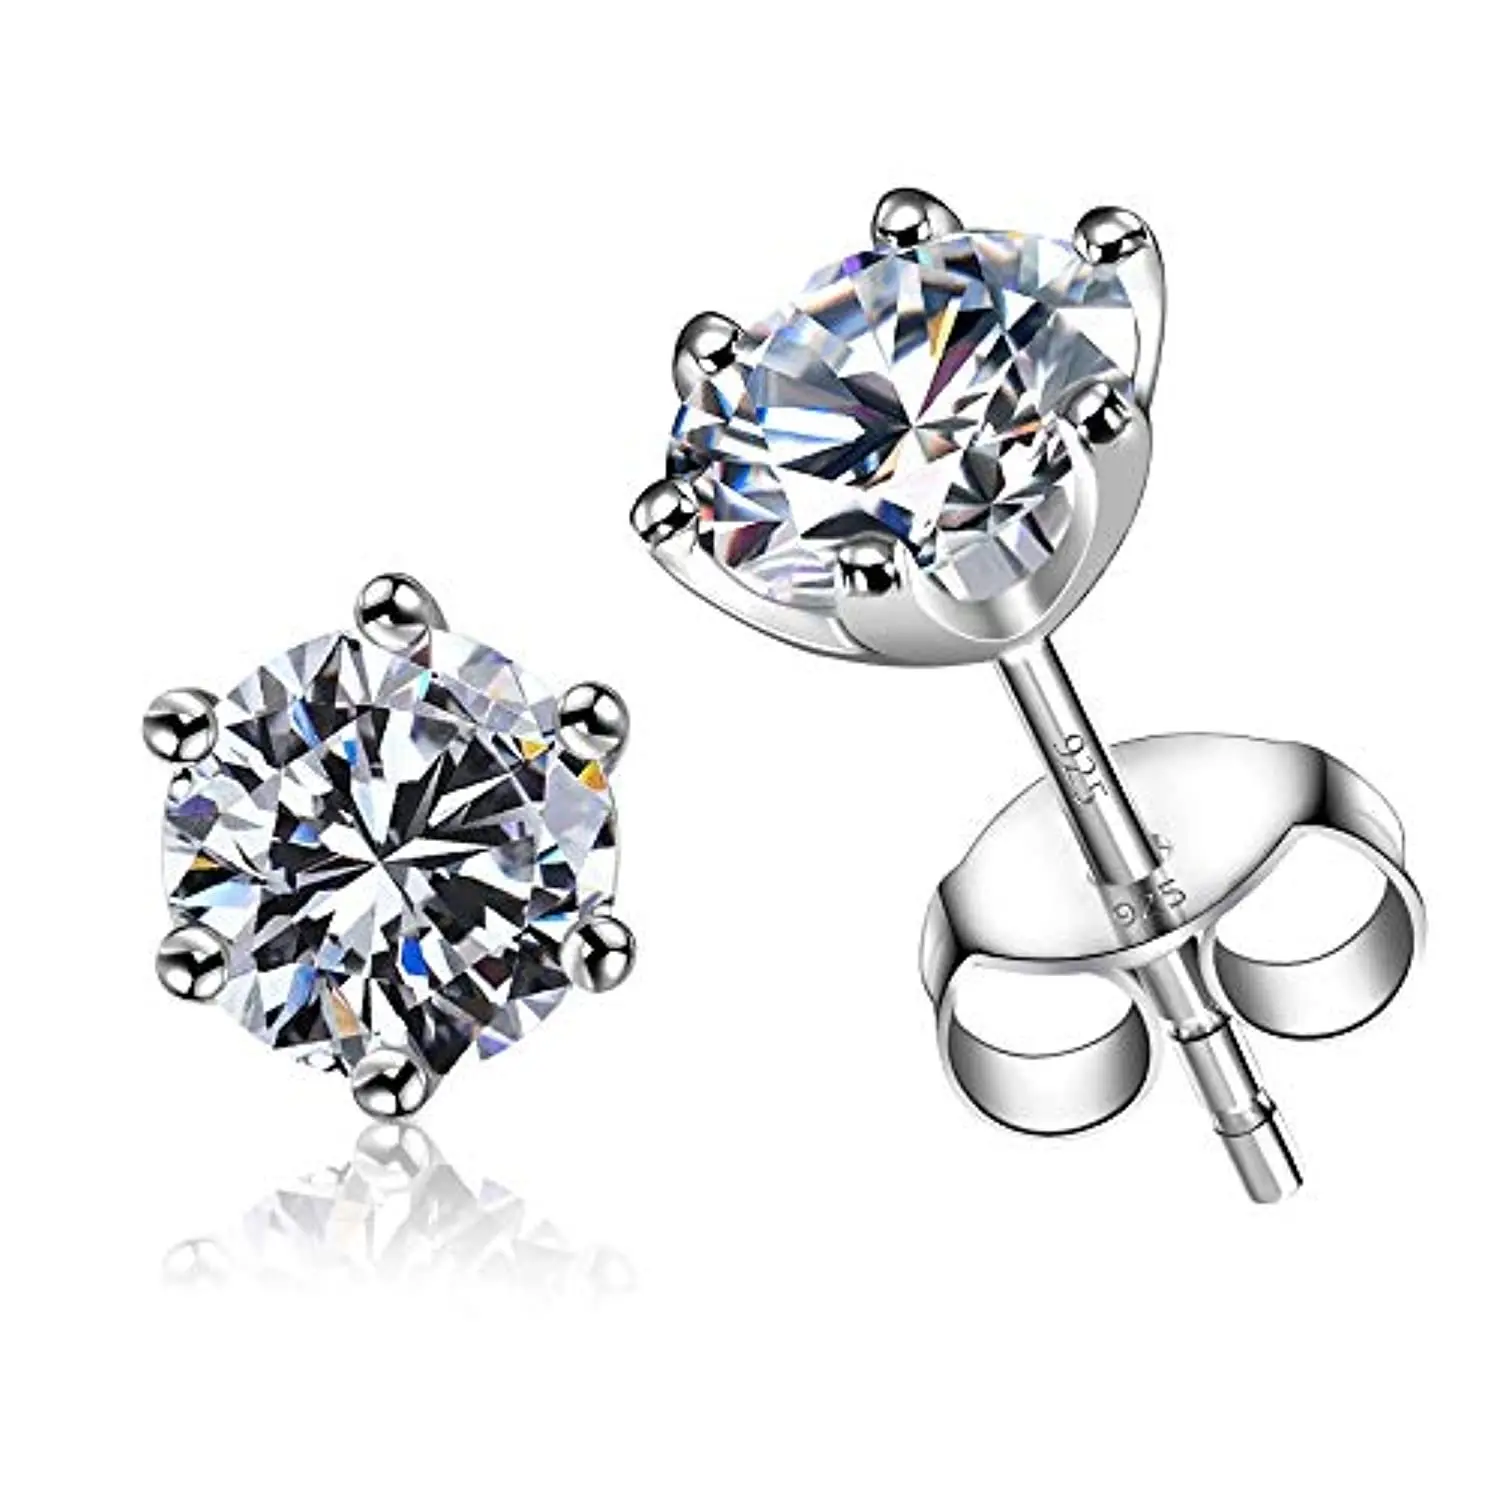 

Custom Hypoallergenic Gold Plated Dainty Inlaid Cubic Zirconia For Women Men Jewelry 925 Sterling Silver Stud Earrings